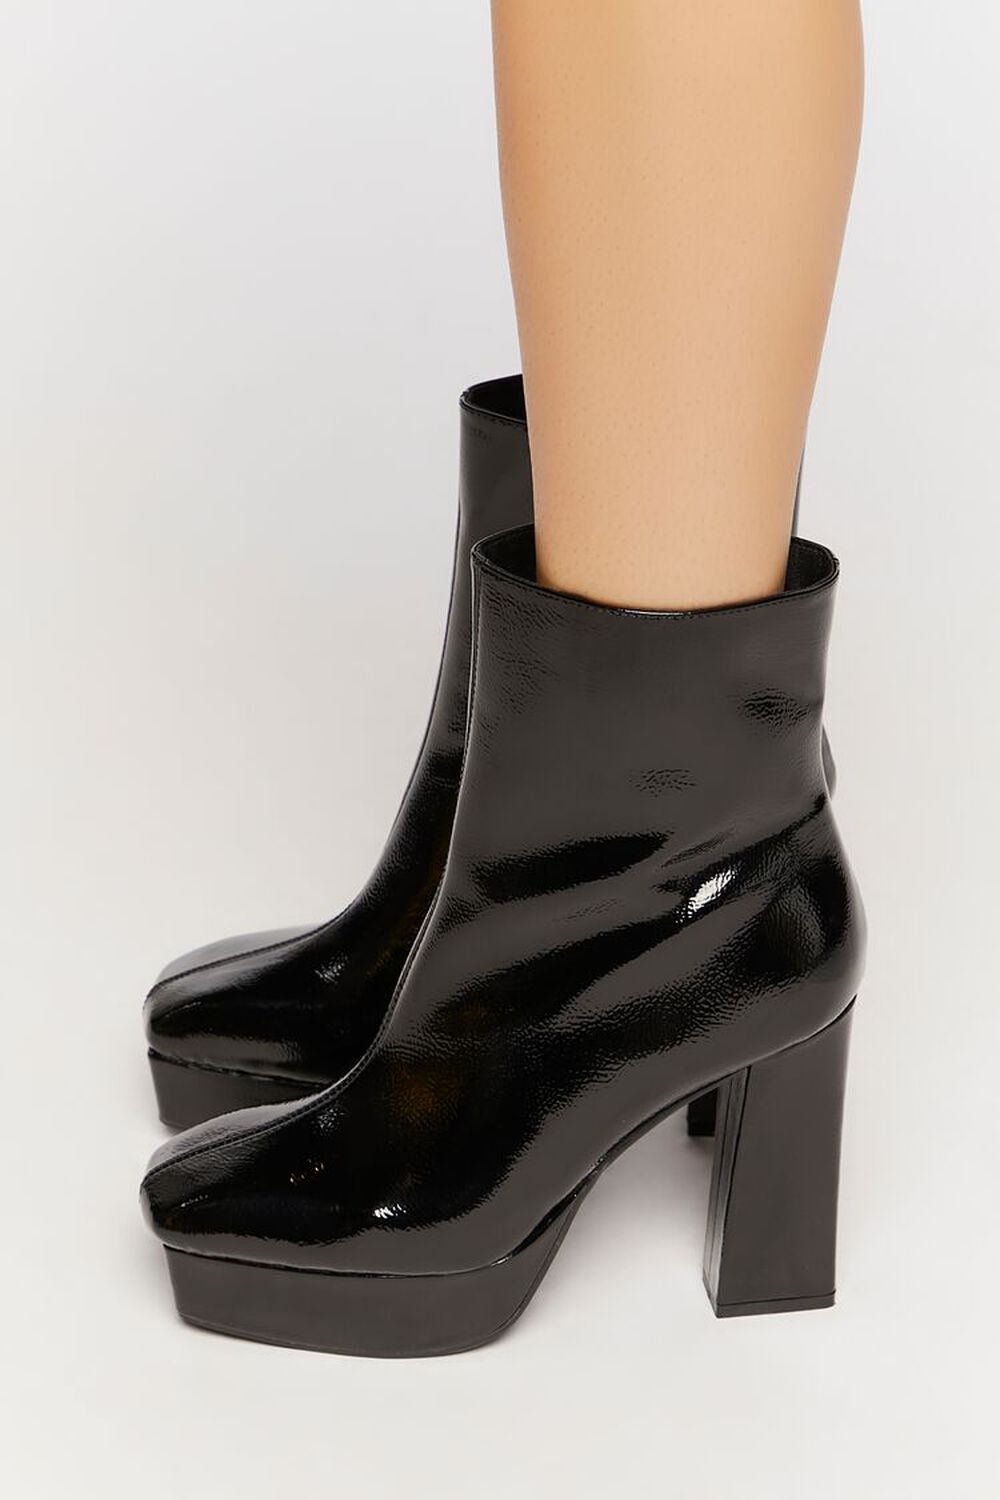 BLACK Pebbled Faux Leather Booties, image 2